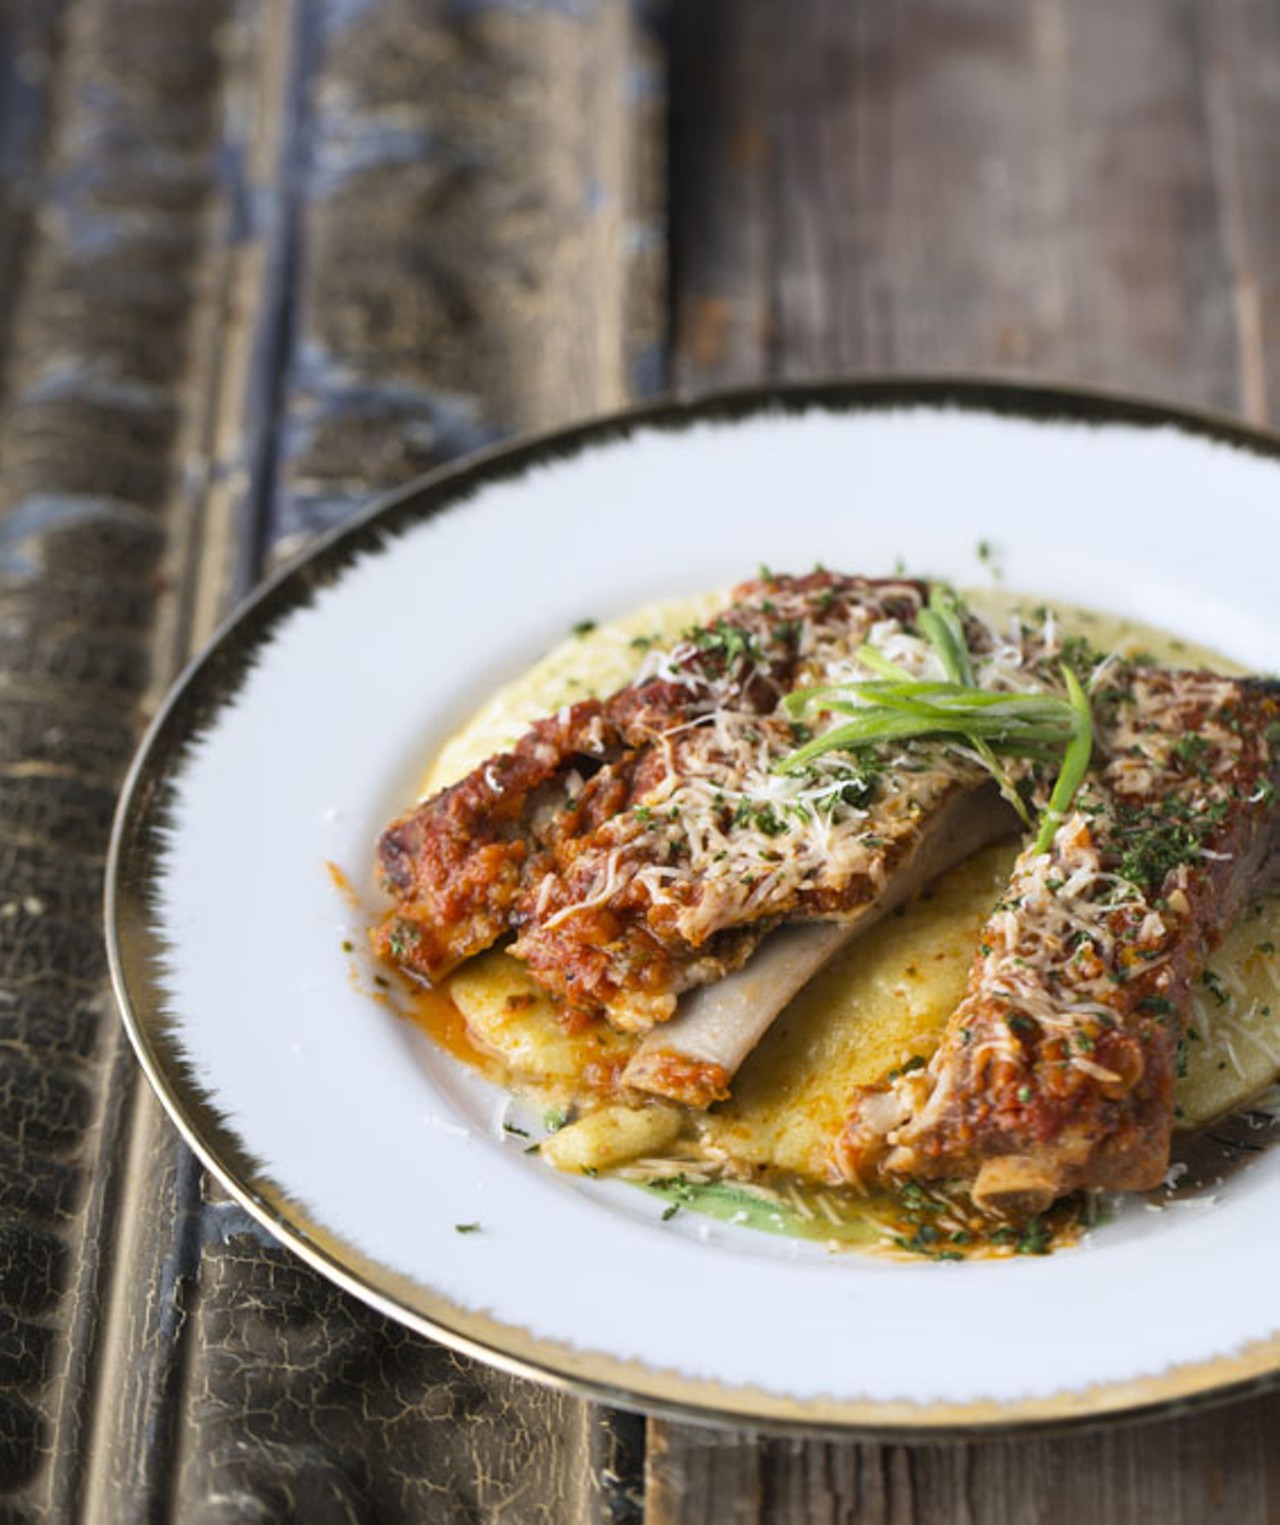 The St. Louis-cut pork ribs are brined overnight and braised in housemade bourbon marinara, then broiled and topped with fresh parmigiano and scallions.